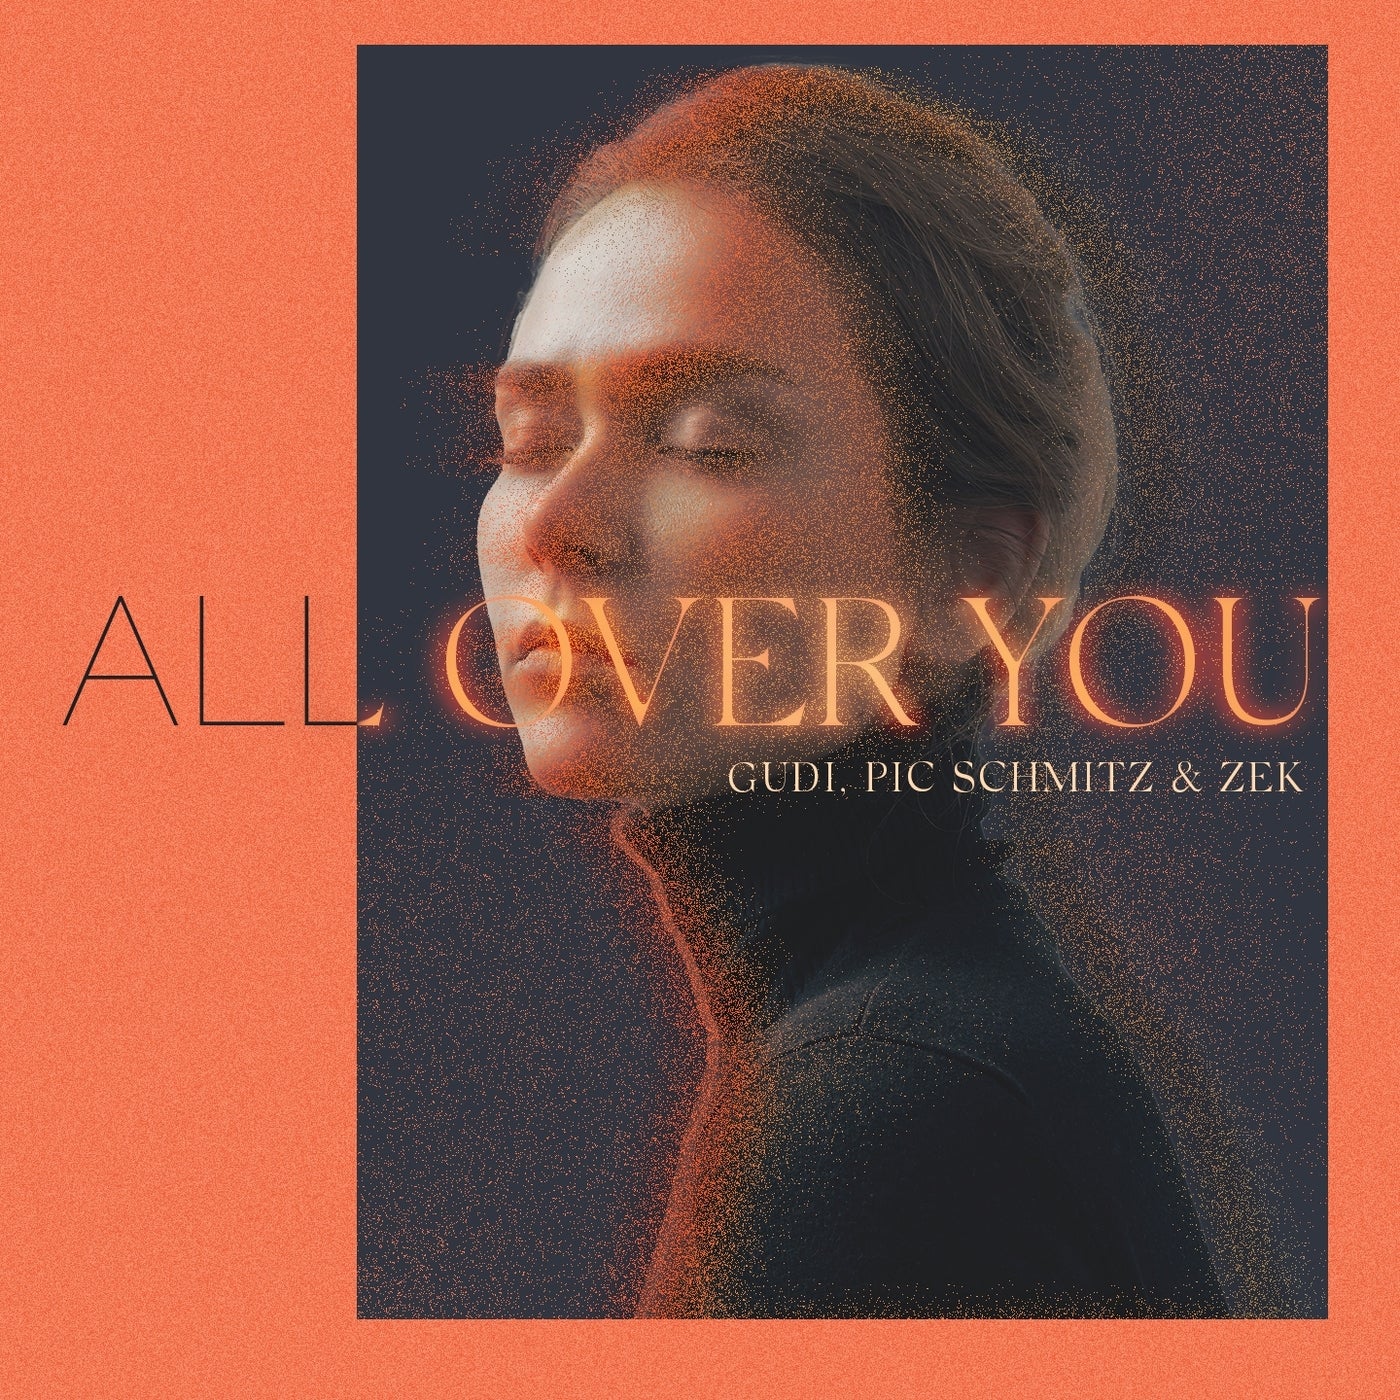 All Over You